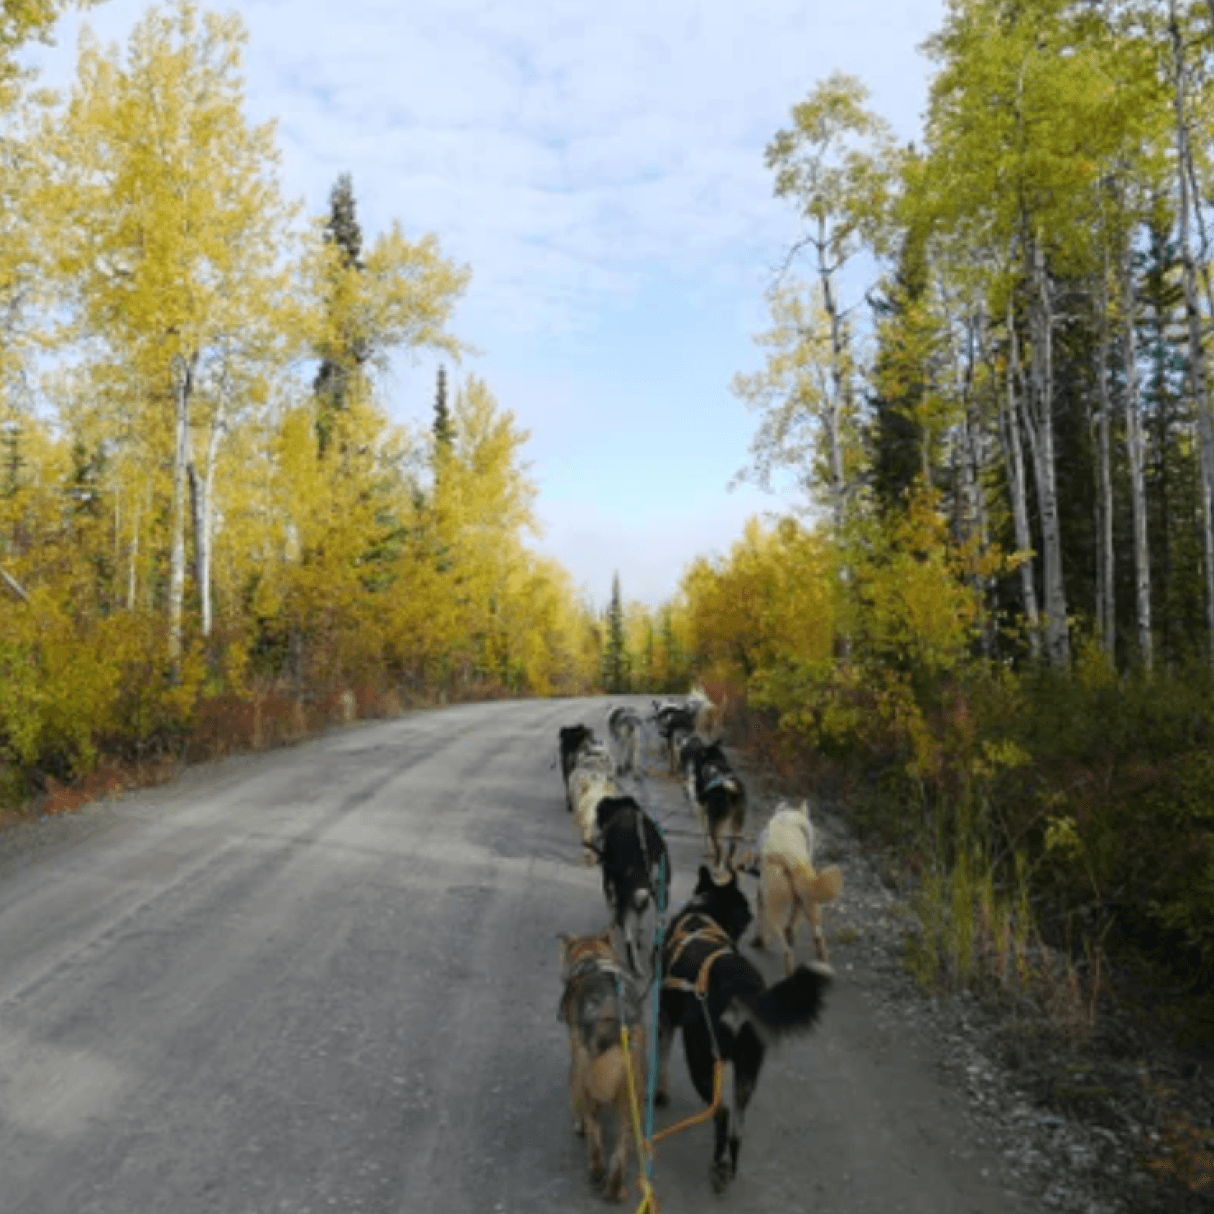 A team of dogs pull a sled along a gravel road surrounded by yellow-leaved trees.